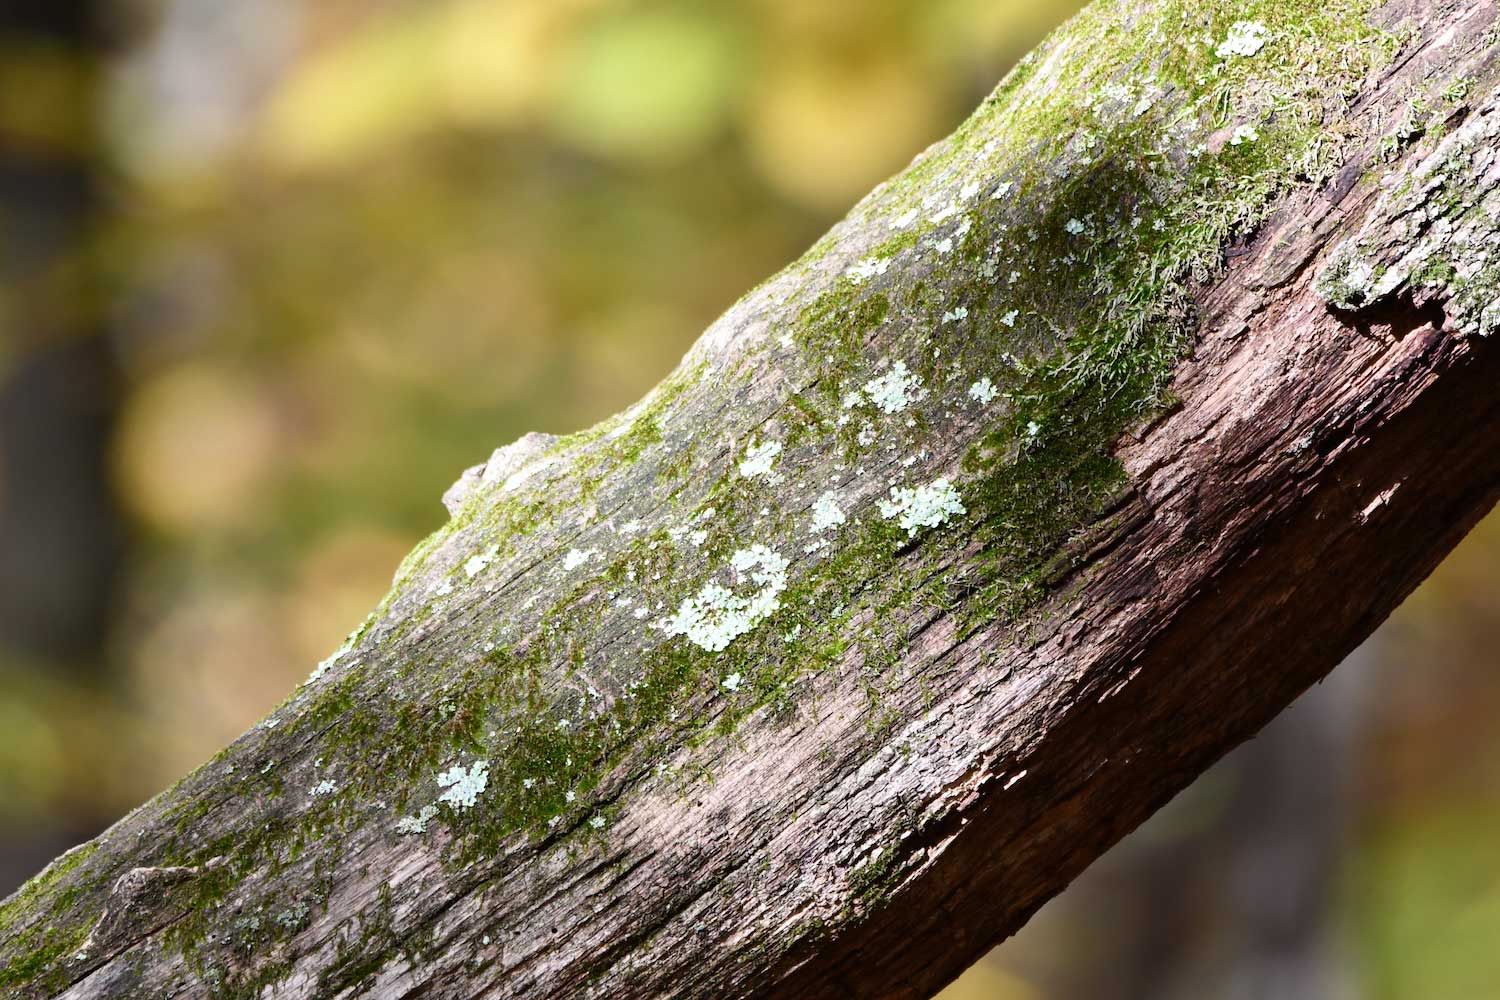 Moss and lichen growing on a log.